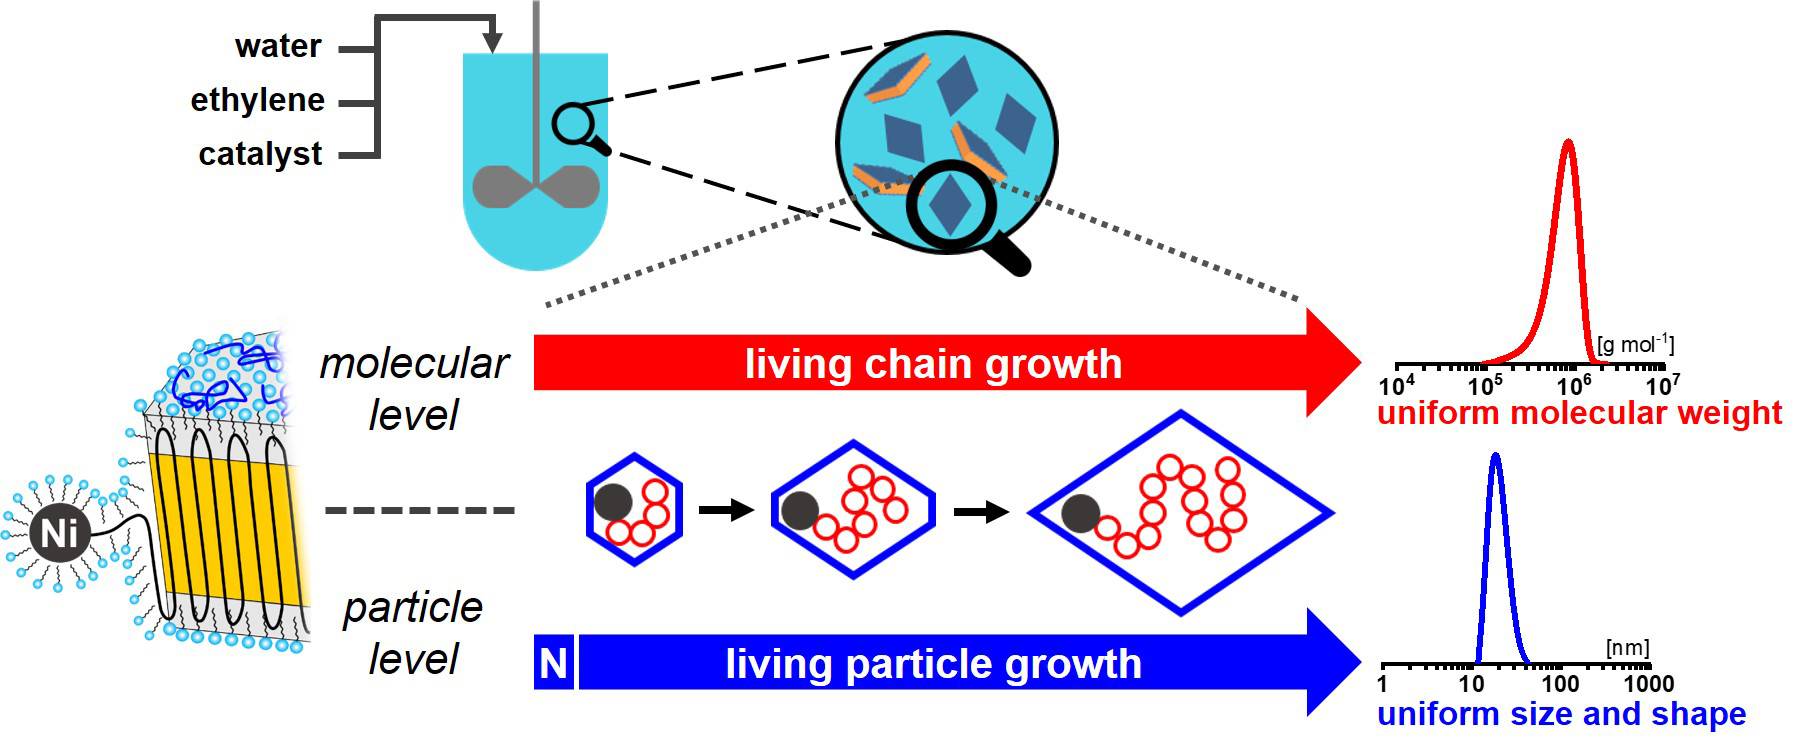 Concept to obtain uniform size and shape particles by controlled polymerization on a molecular as well as particle level. An effective nucleation (N) ensures that particles contain only one active site, and start to grow virtually at the same time. Due to the living character of polymerization, all particles continue to grow for the entire duration of the experiment, to yield particles each composed of a chain of identical length. As the growing chains are immediately deposited on the growing single-crystal particle during this process, particle shape evolves uniformly over time during polymerization. Copyright: Stefan Mecking and Manuel Schnitte